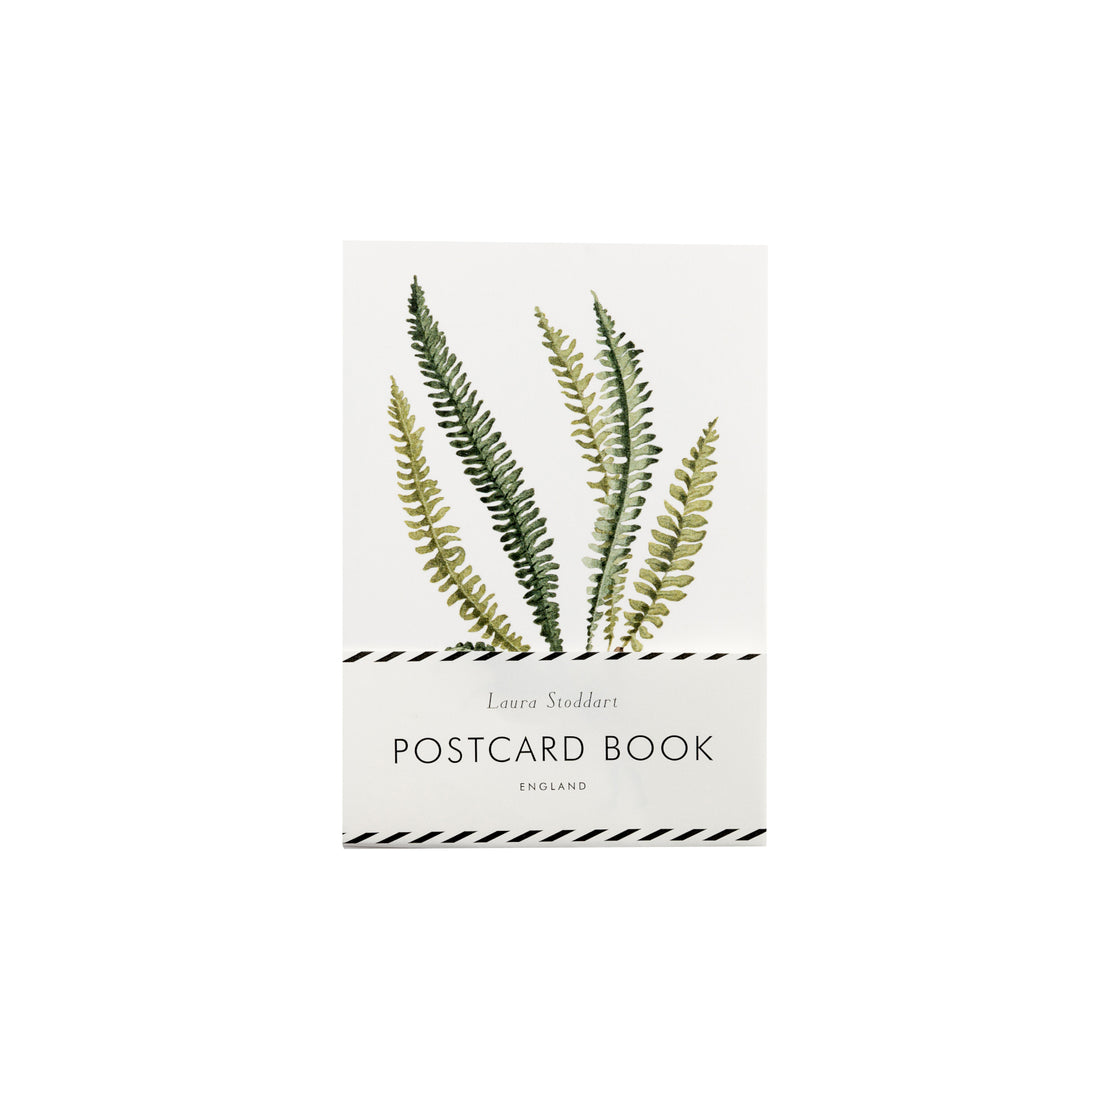 A Fabulous Ferns Postcard Book from Hester &amp; Cook featuring elegant fern leaves.